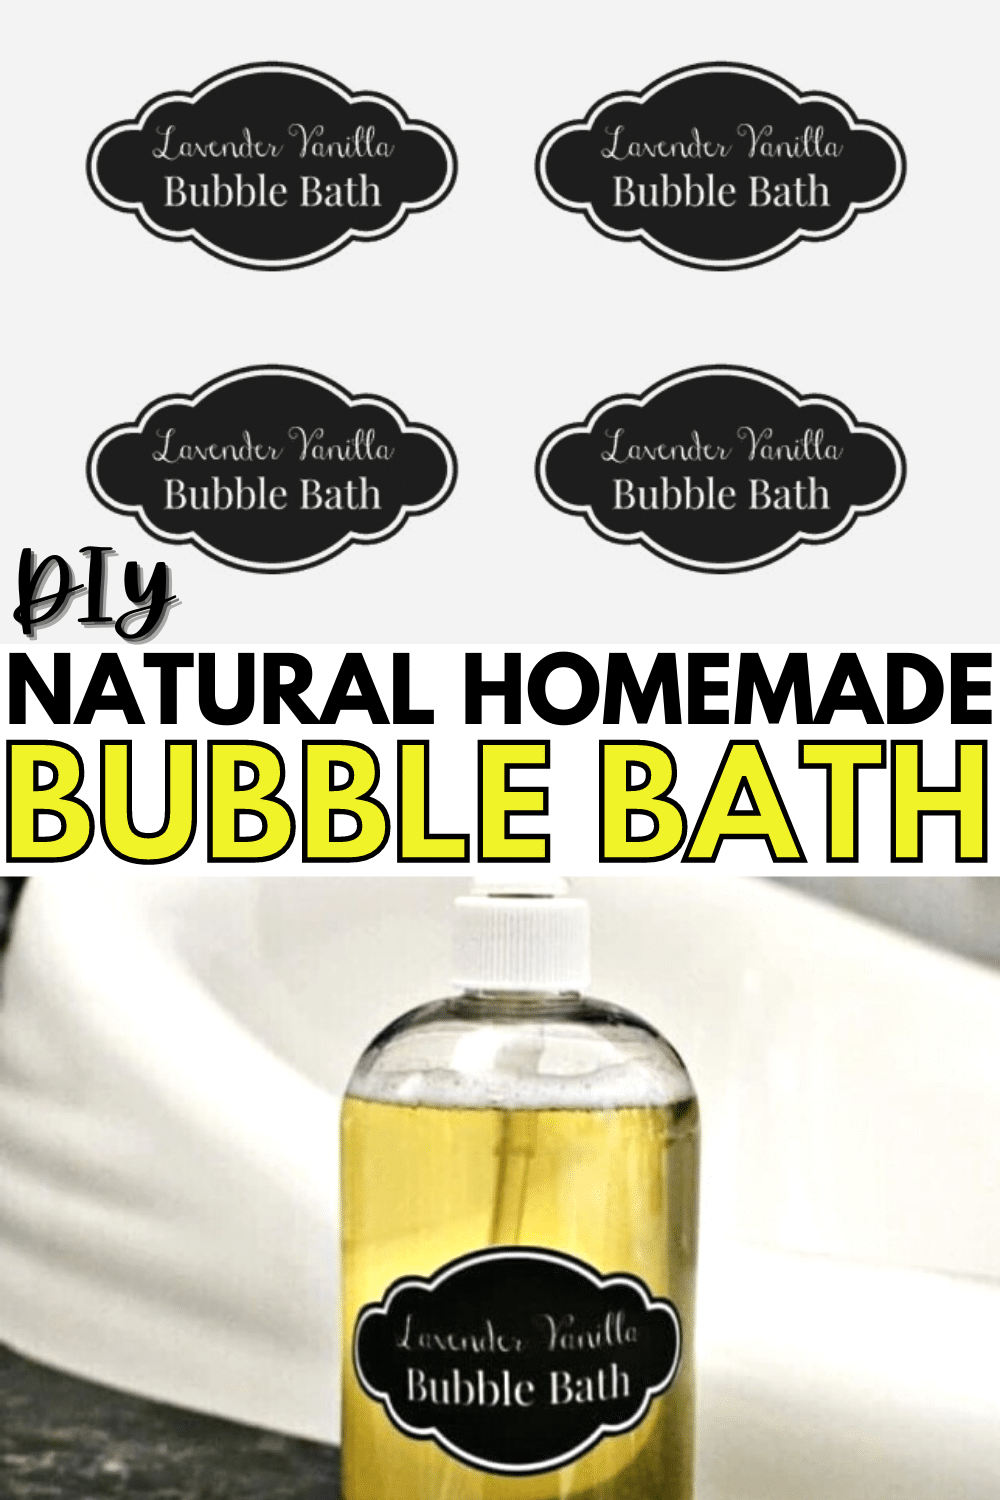 top image is printable lavender vanilla bubble bath labels, bottom image is bubble bath in a bottle next to a white sink, with title text reading DIY Natural Homemade Bubble Bath